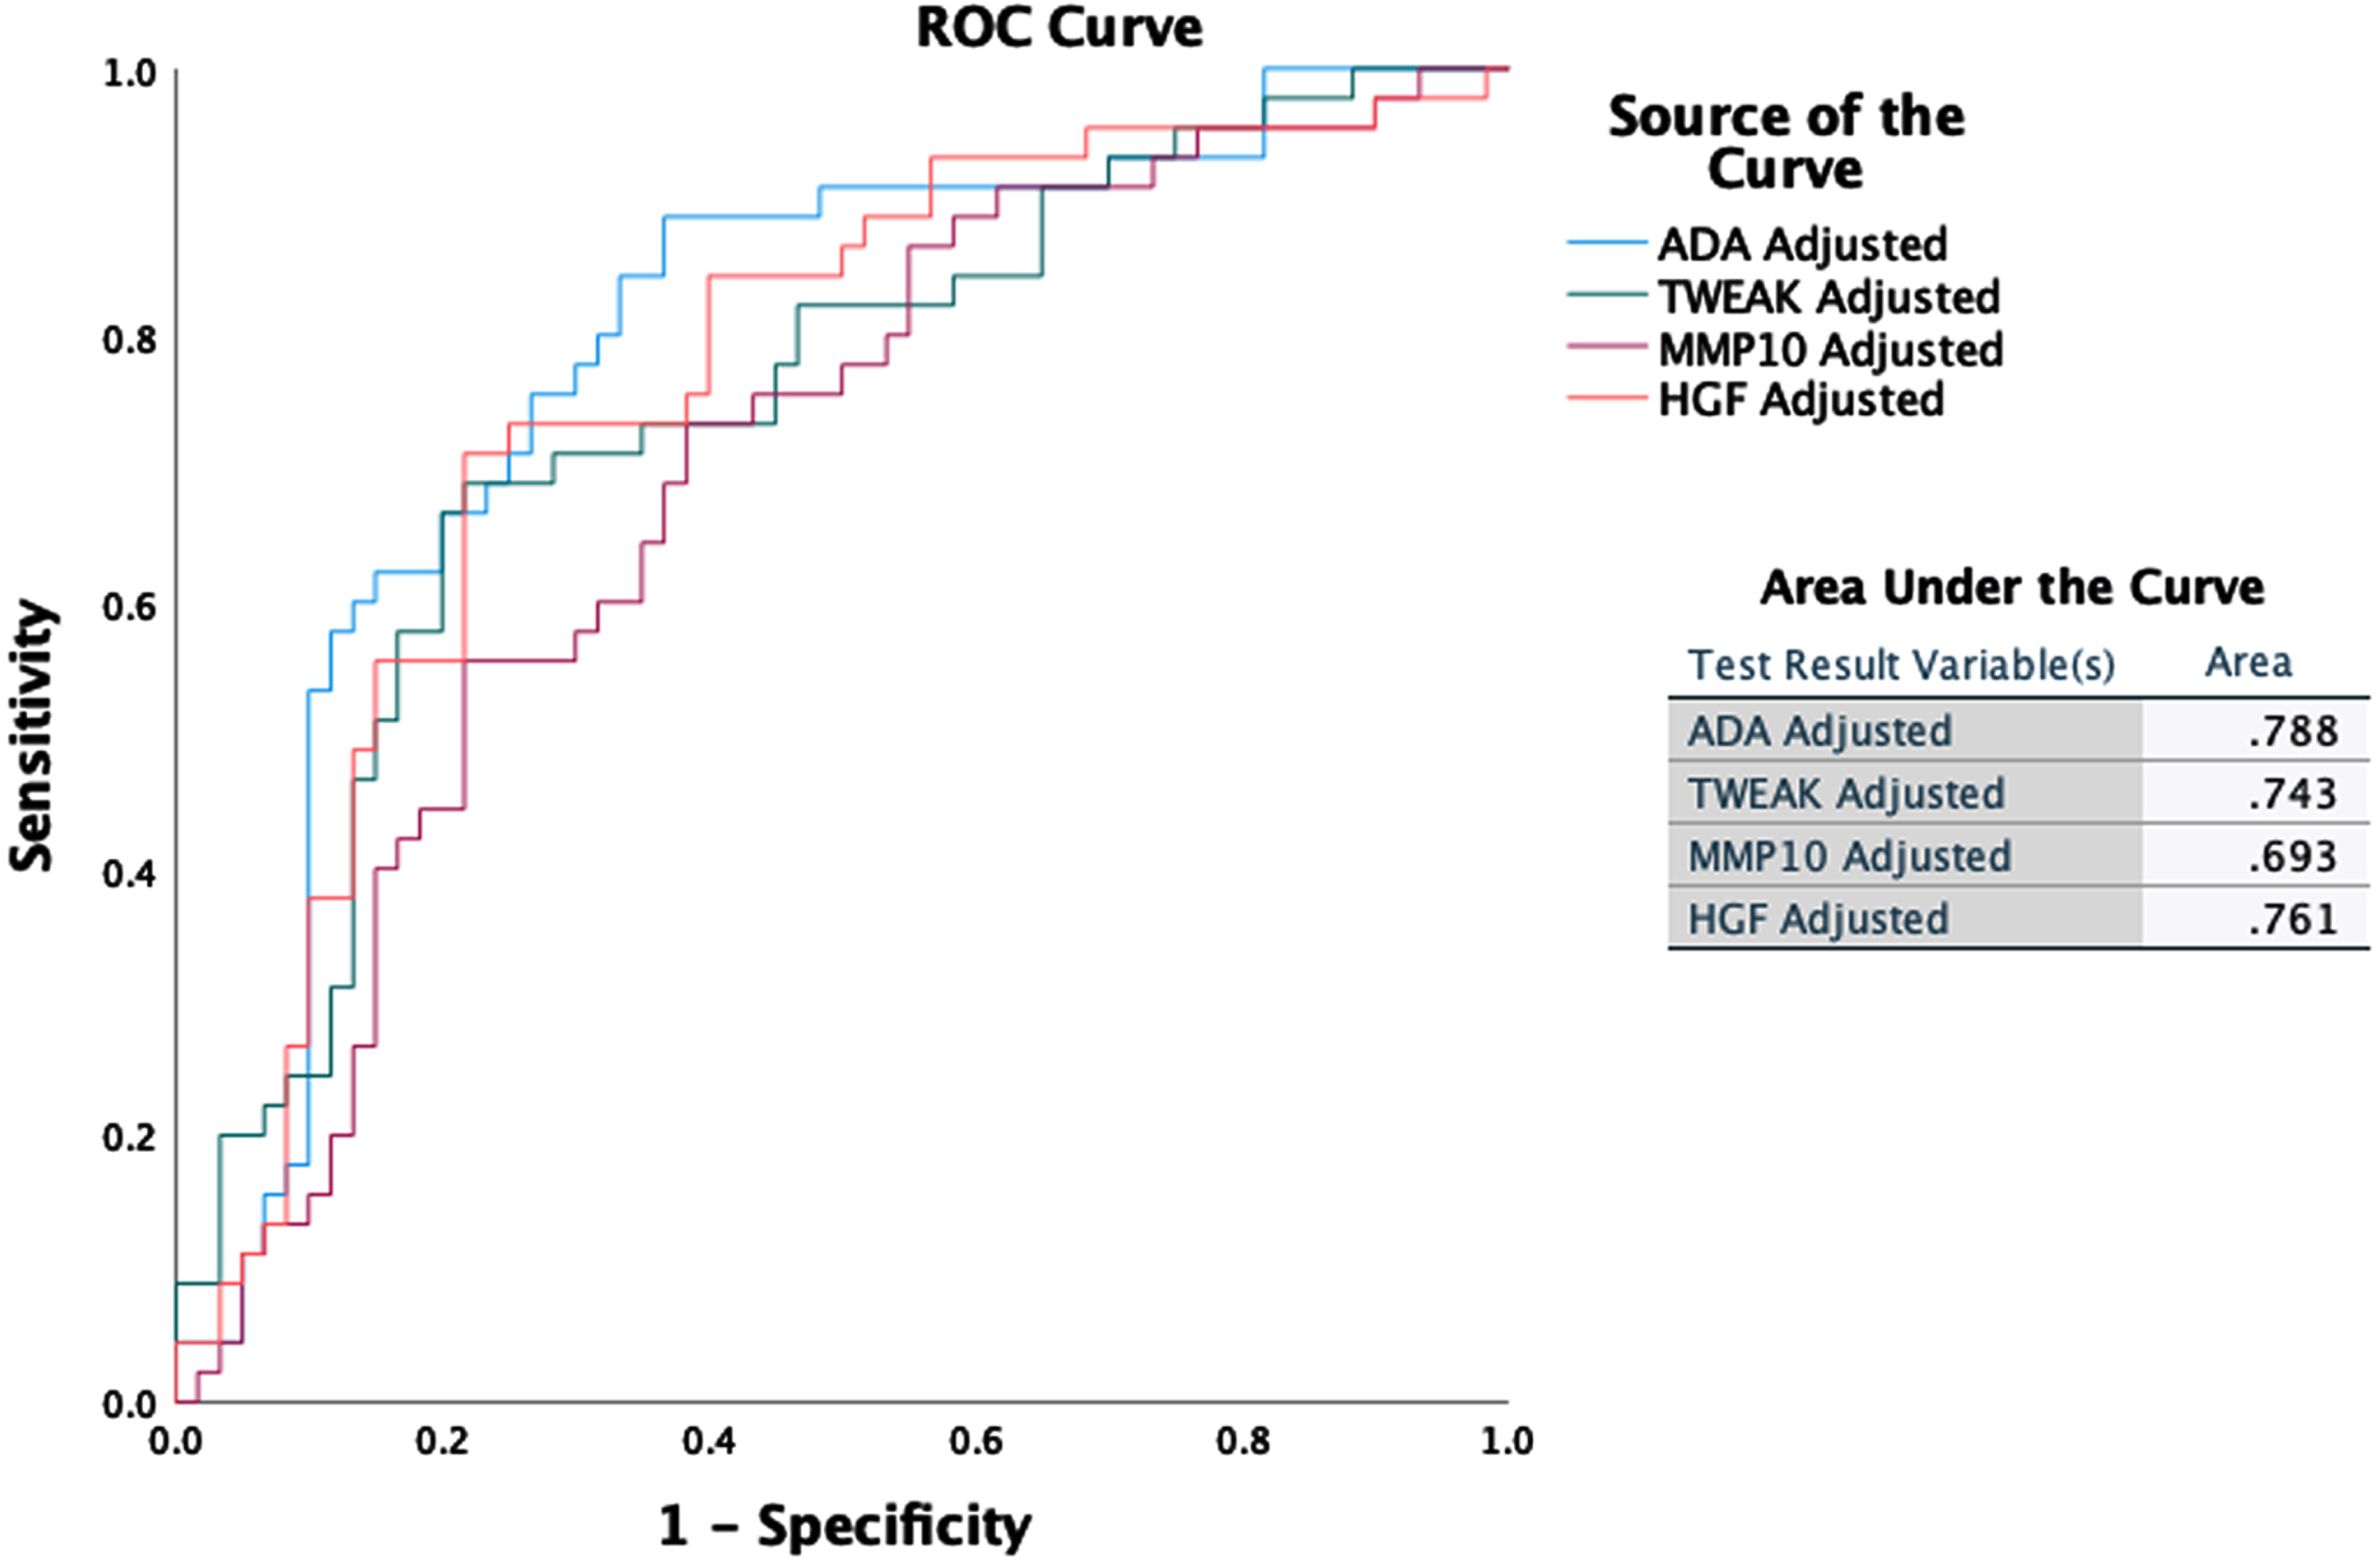 ROC curves and AUROC scores for HGF, MMP-10, ADA, and TWEAK adjusted for participant’s age and sex as independent predictors of high likelihood of AD.